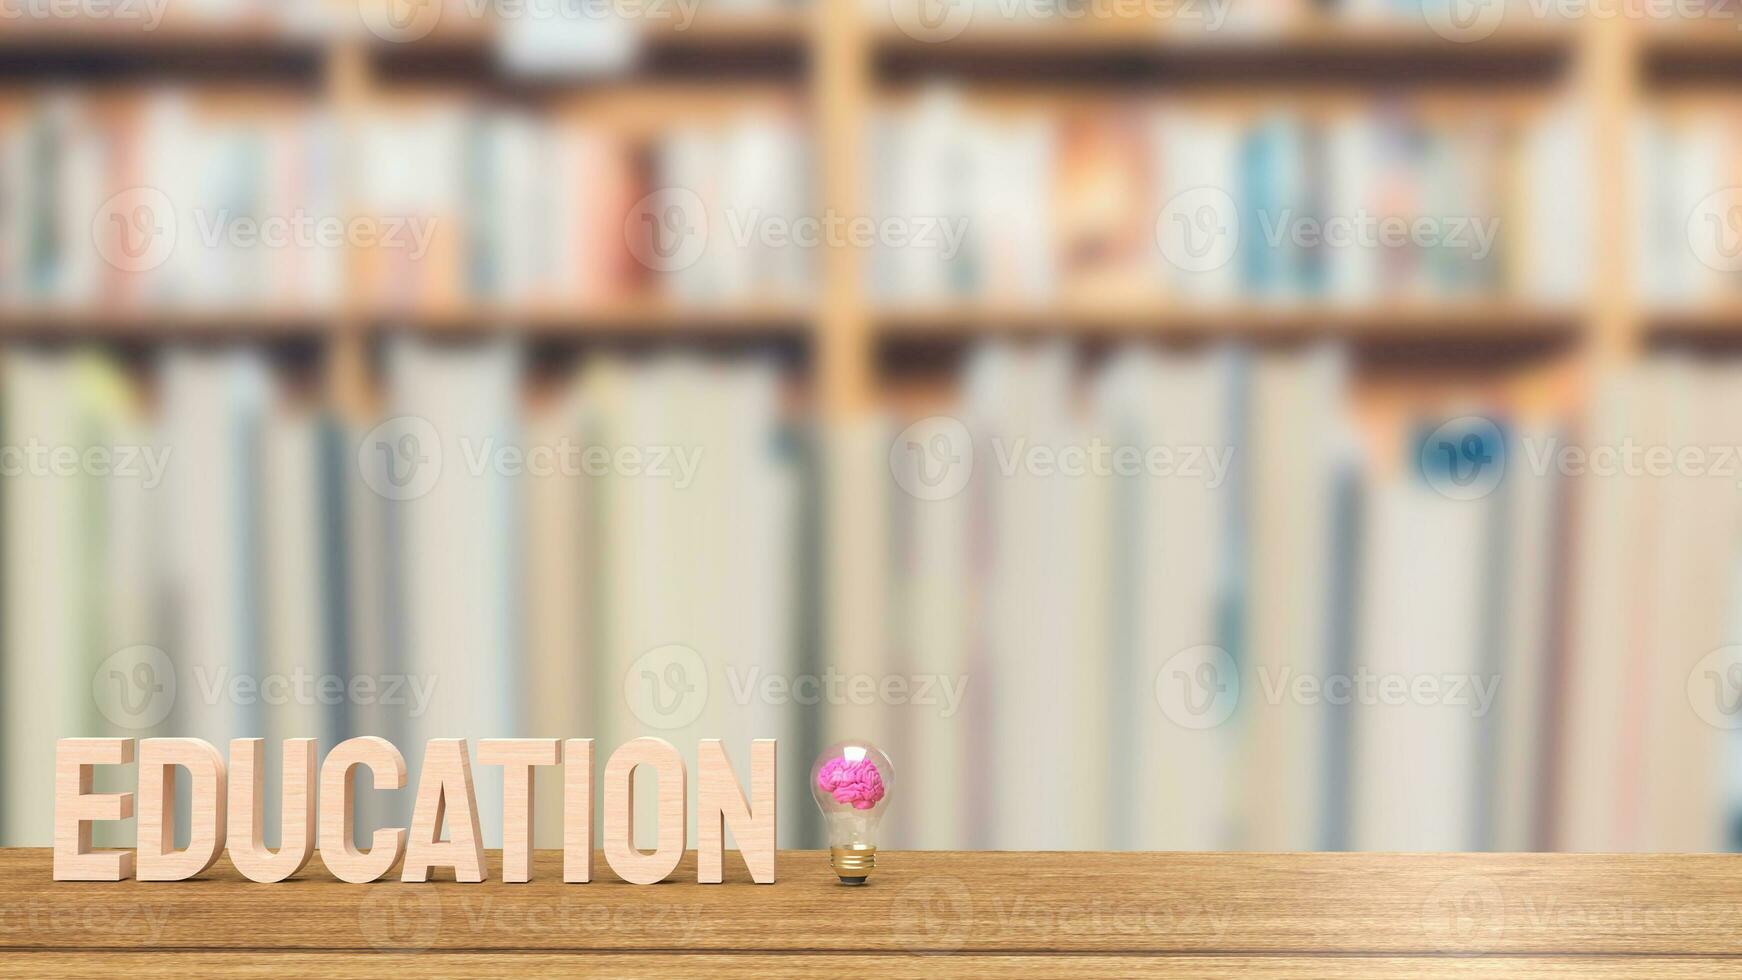 The brain in light bulb and eduction word 3d rendering photo